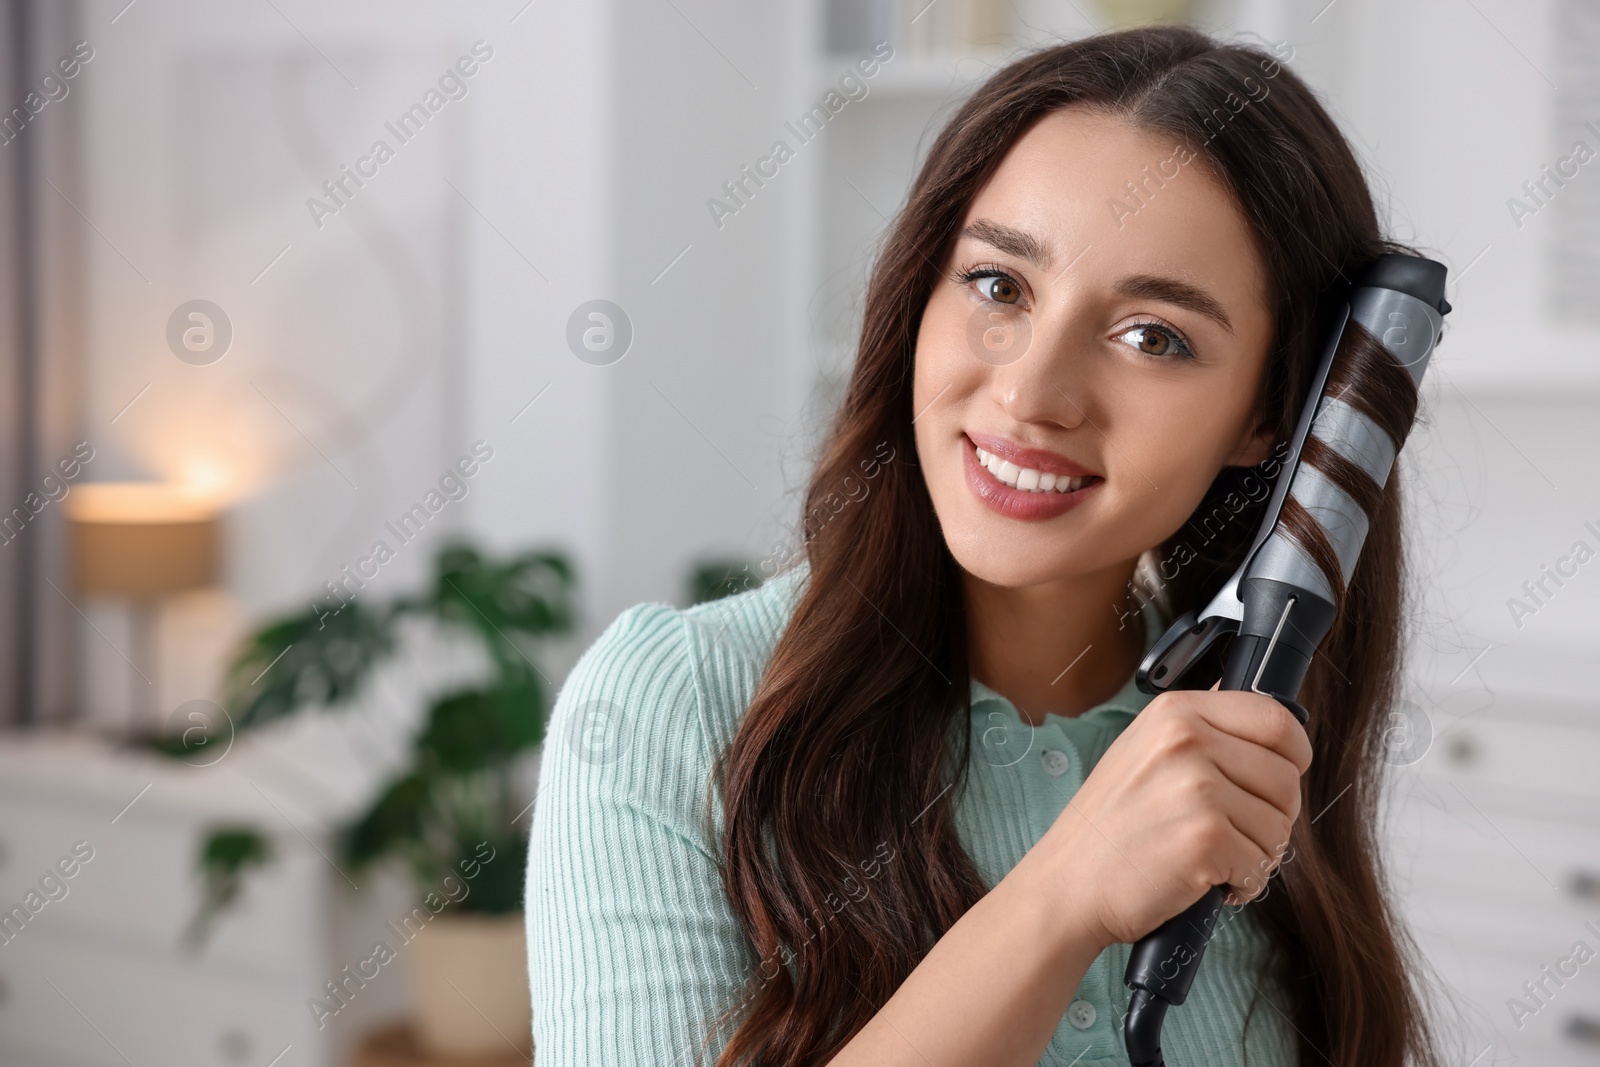 Photo of Smiling woman using curling hair iron at home. Space for text